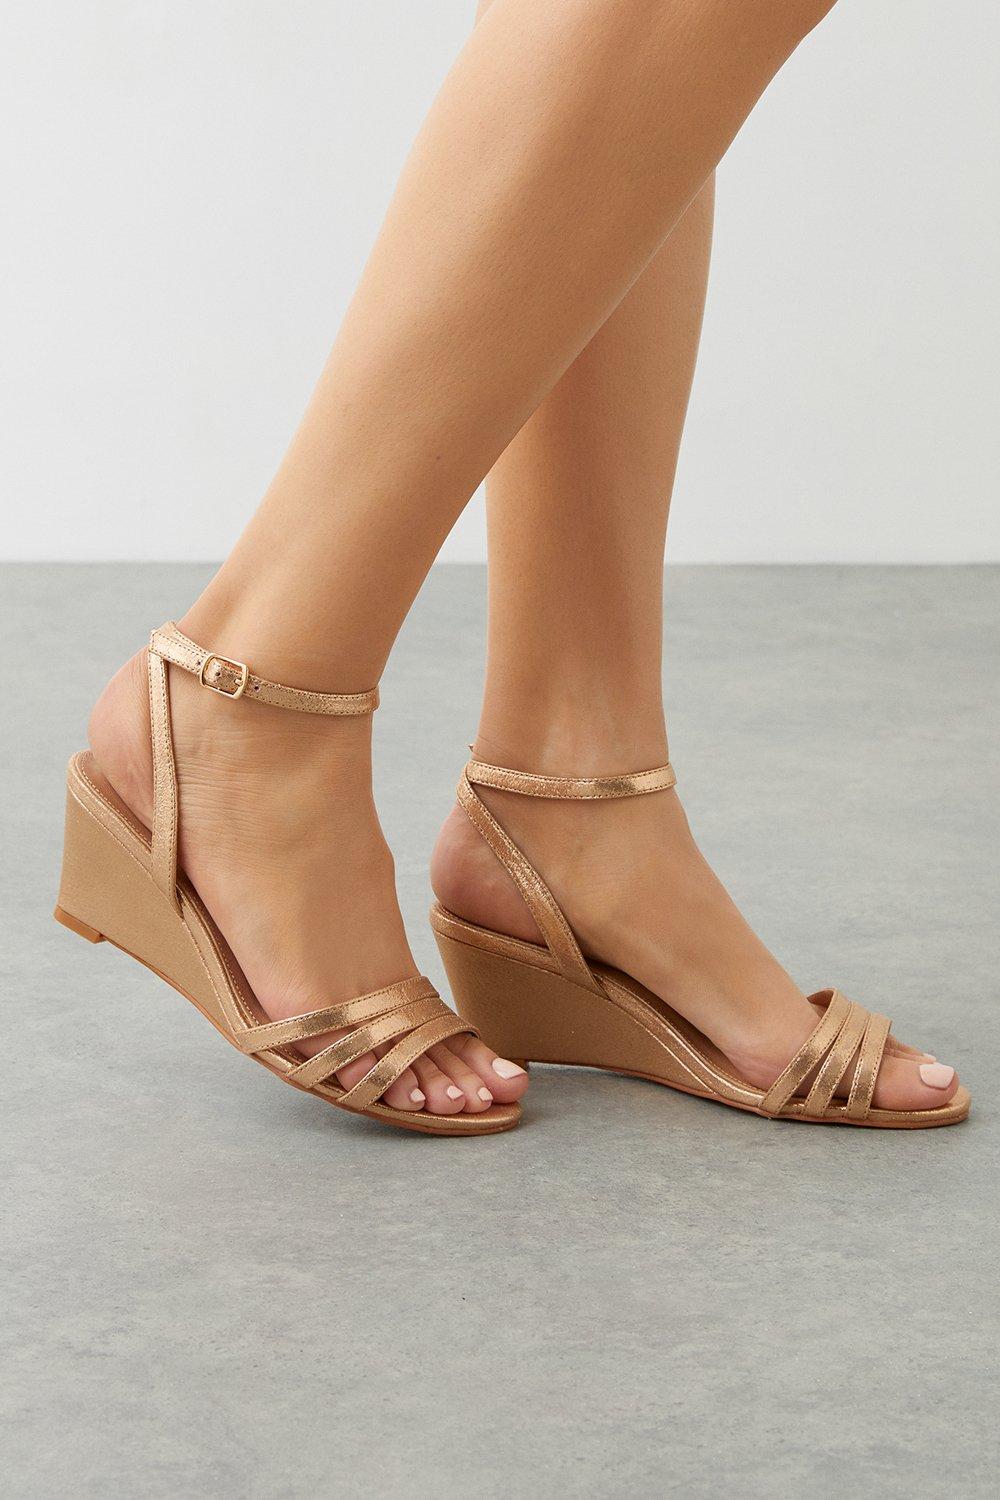 Women's Good For The Sole: Wide Fit Angelina Wedge Heel Sandals - rose gold - 7